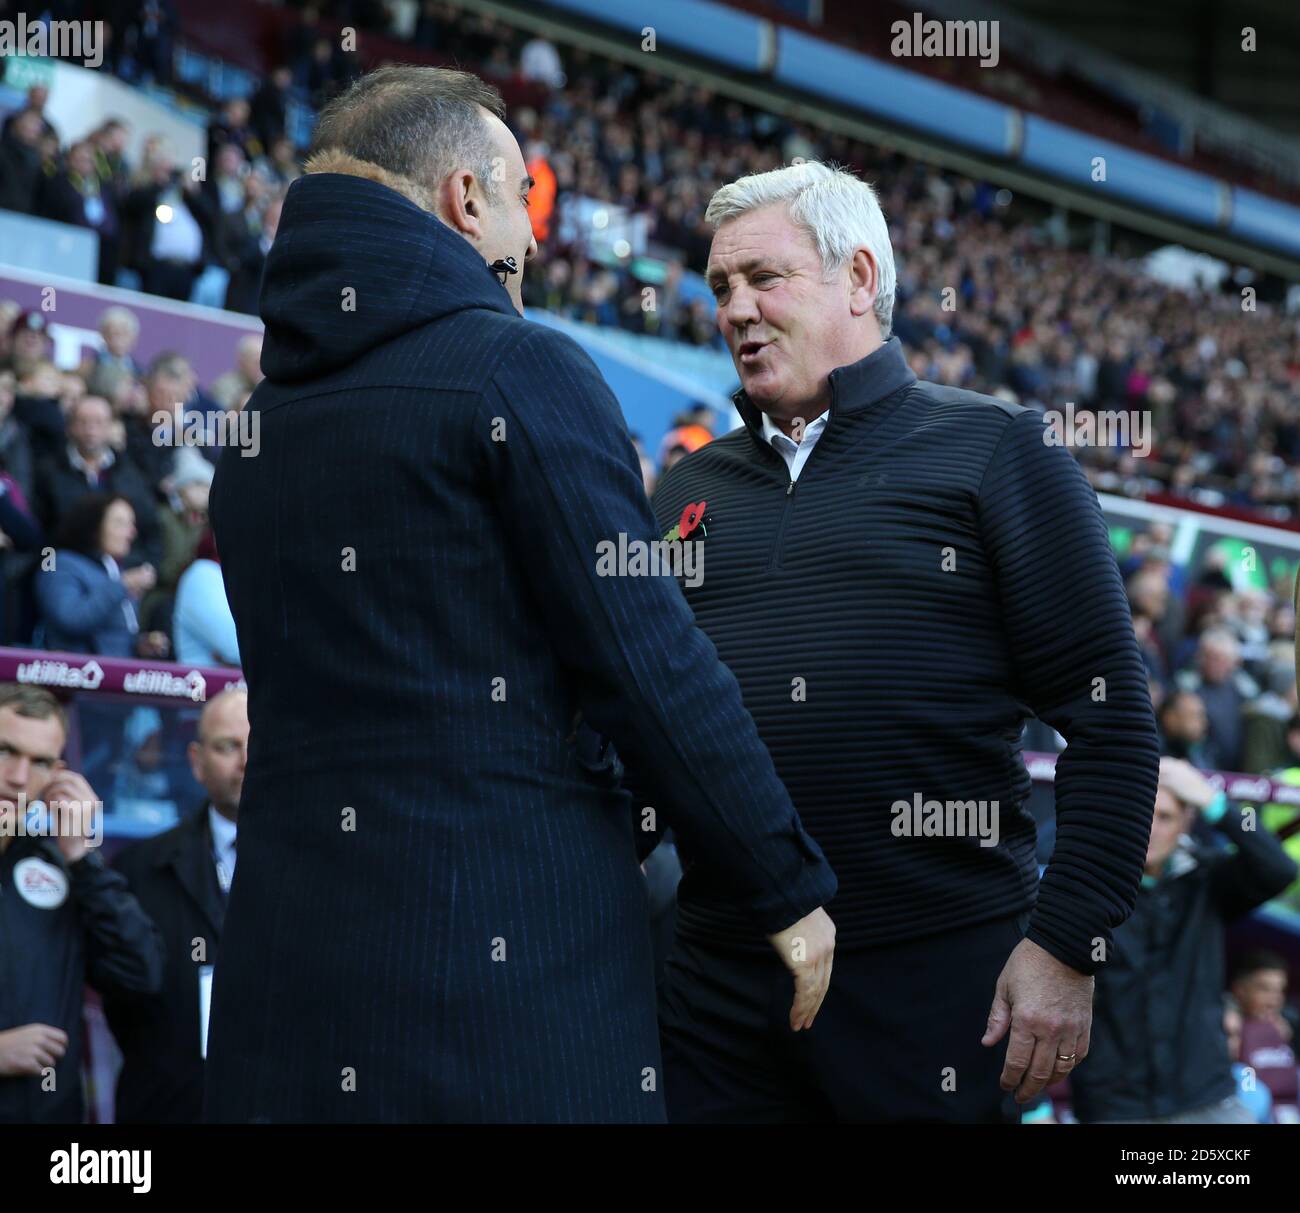 Aston Villa manager Steve Bruce and Sheffield Wednesday manager Carlos Carvalhal greet each other before the game Stock Photo